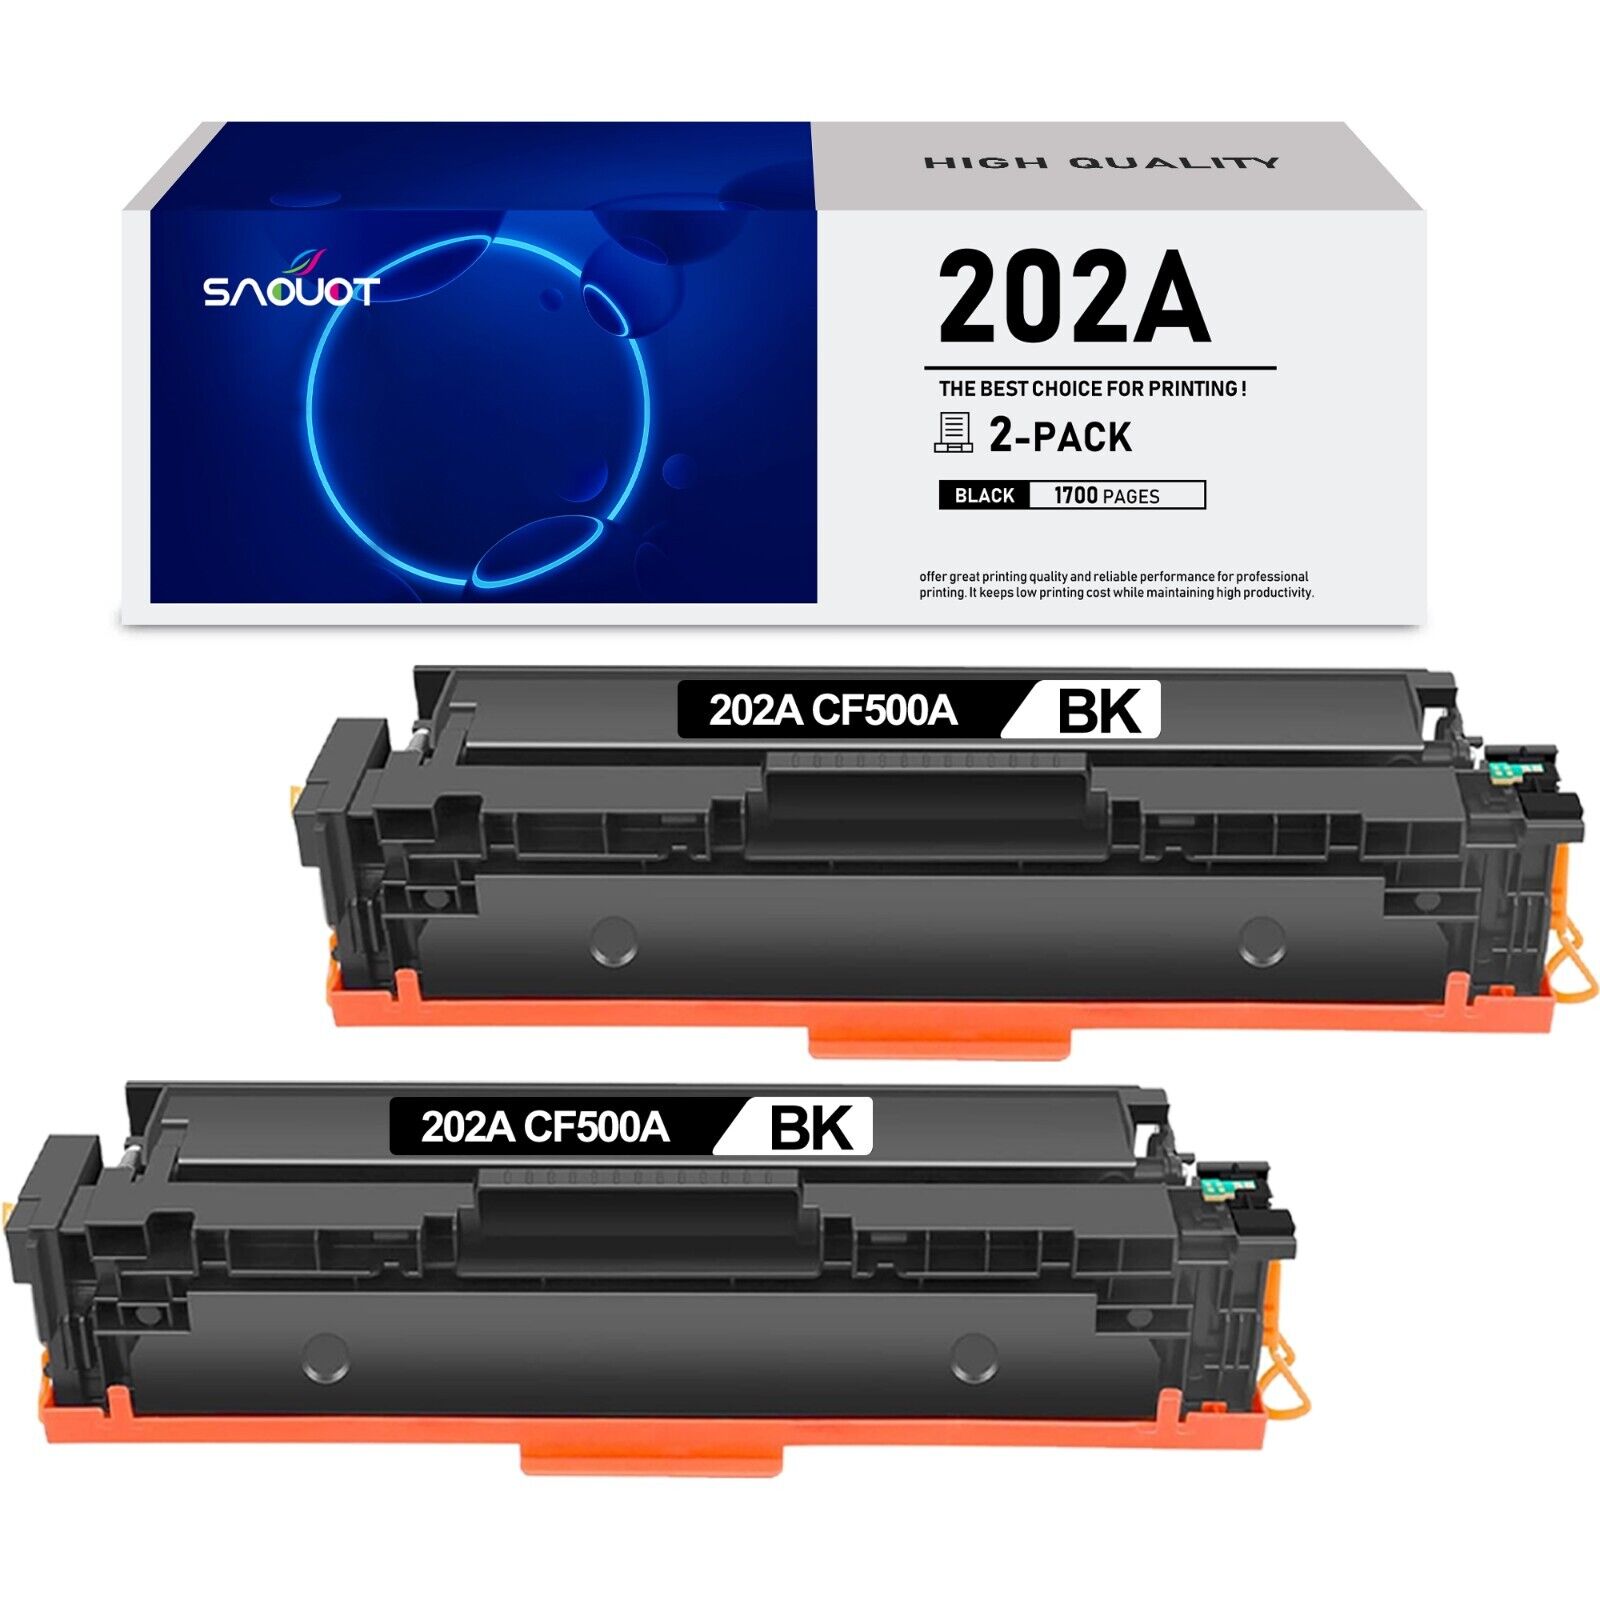 202A Toner Cartridge Replacement for HP Pro M254dw M254dn M254nw  M254 M281fdn